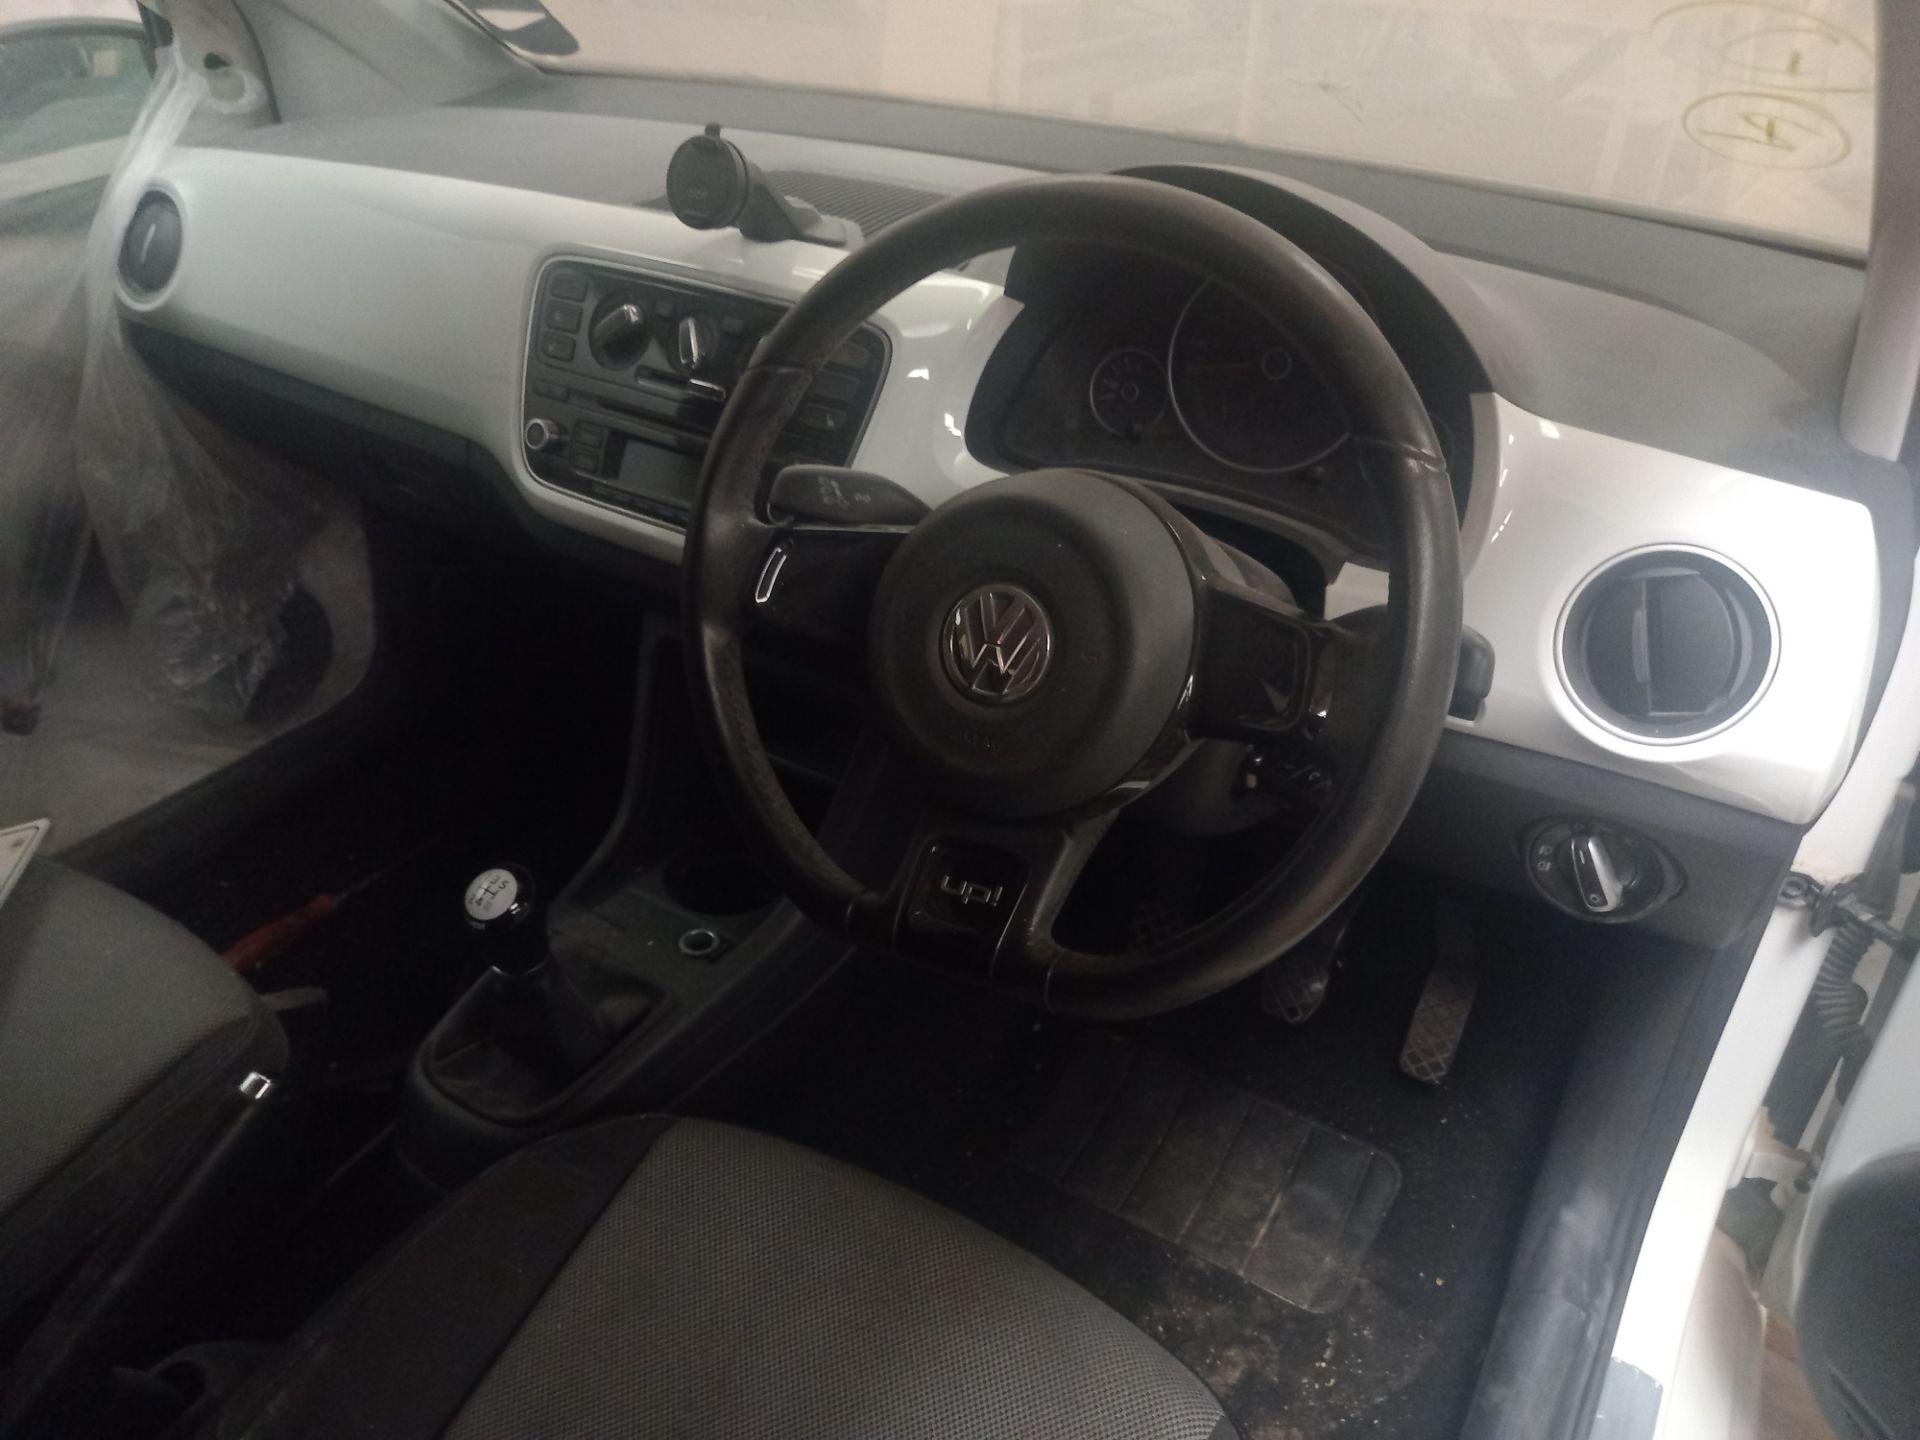 VW UP - Image 4 of 5